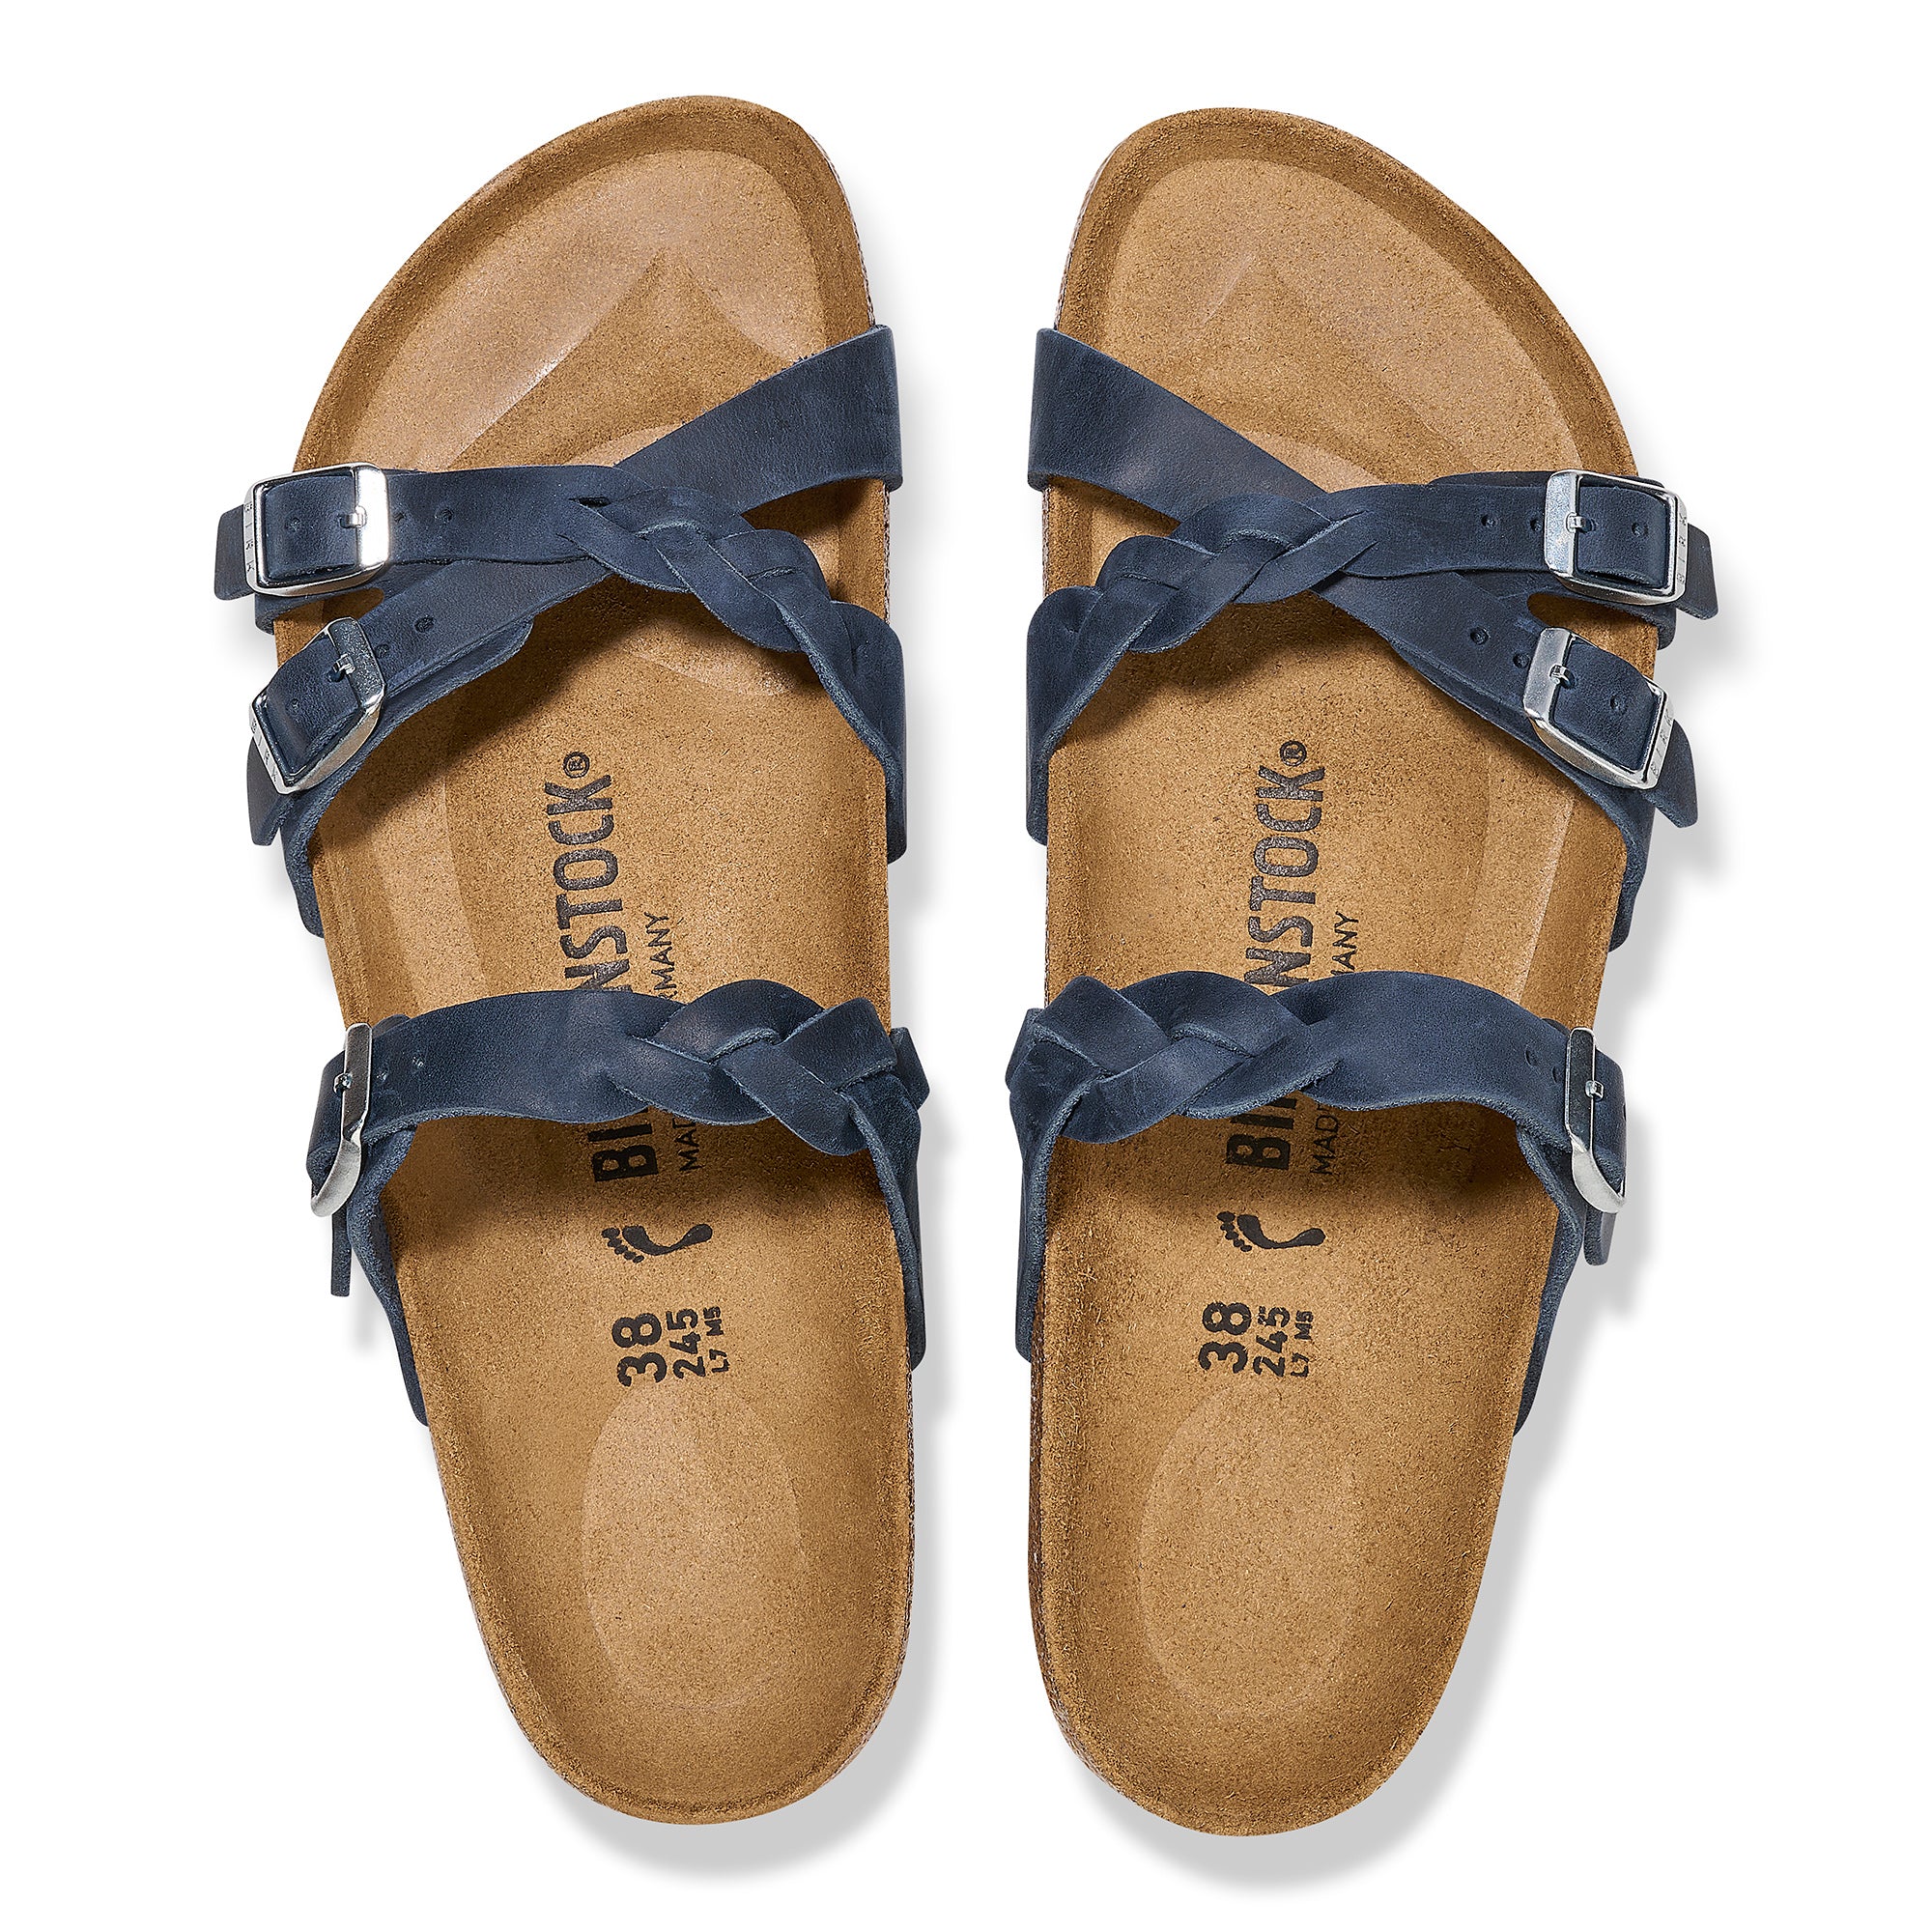 Birkenstock Limited Edition Franca Braid navy oiled leather